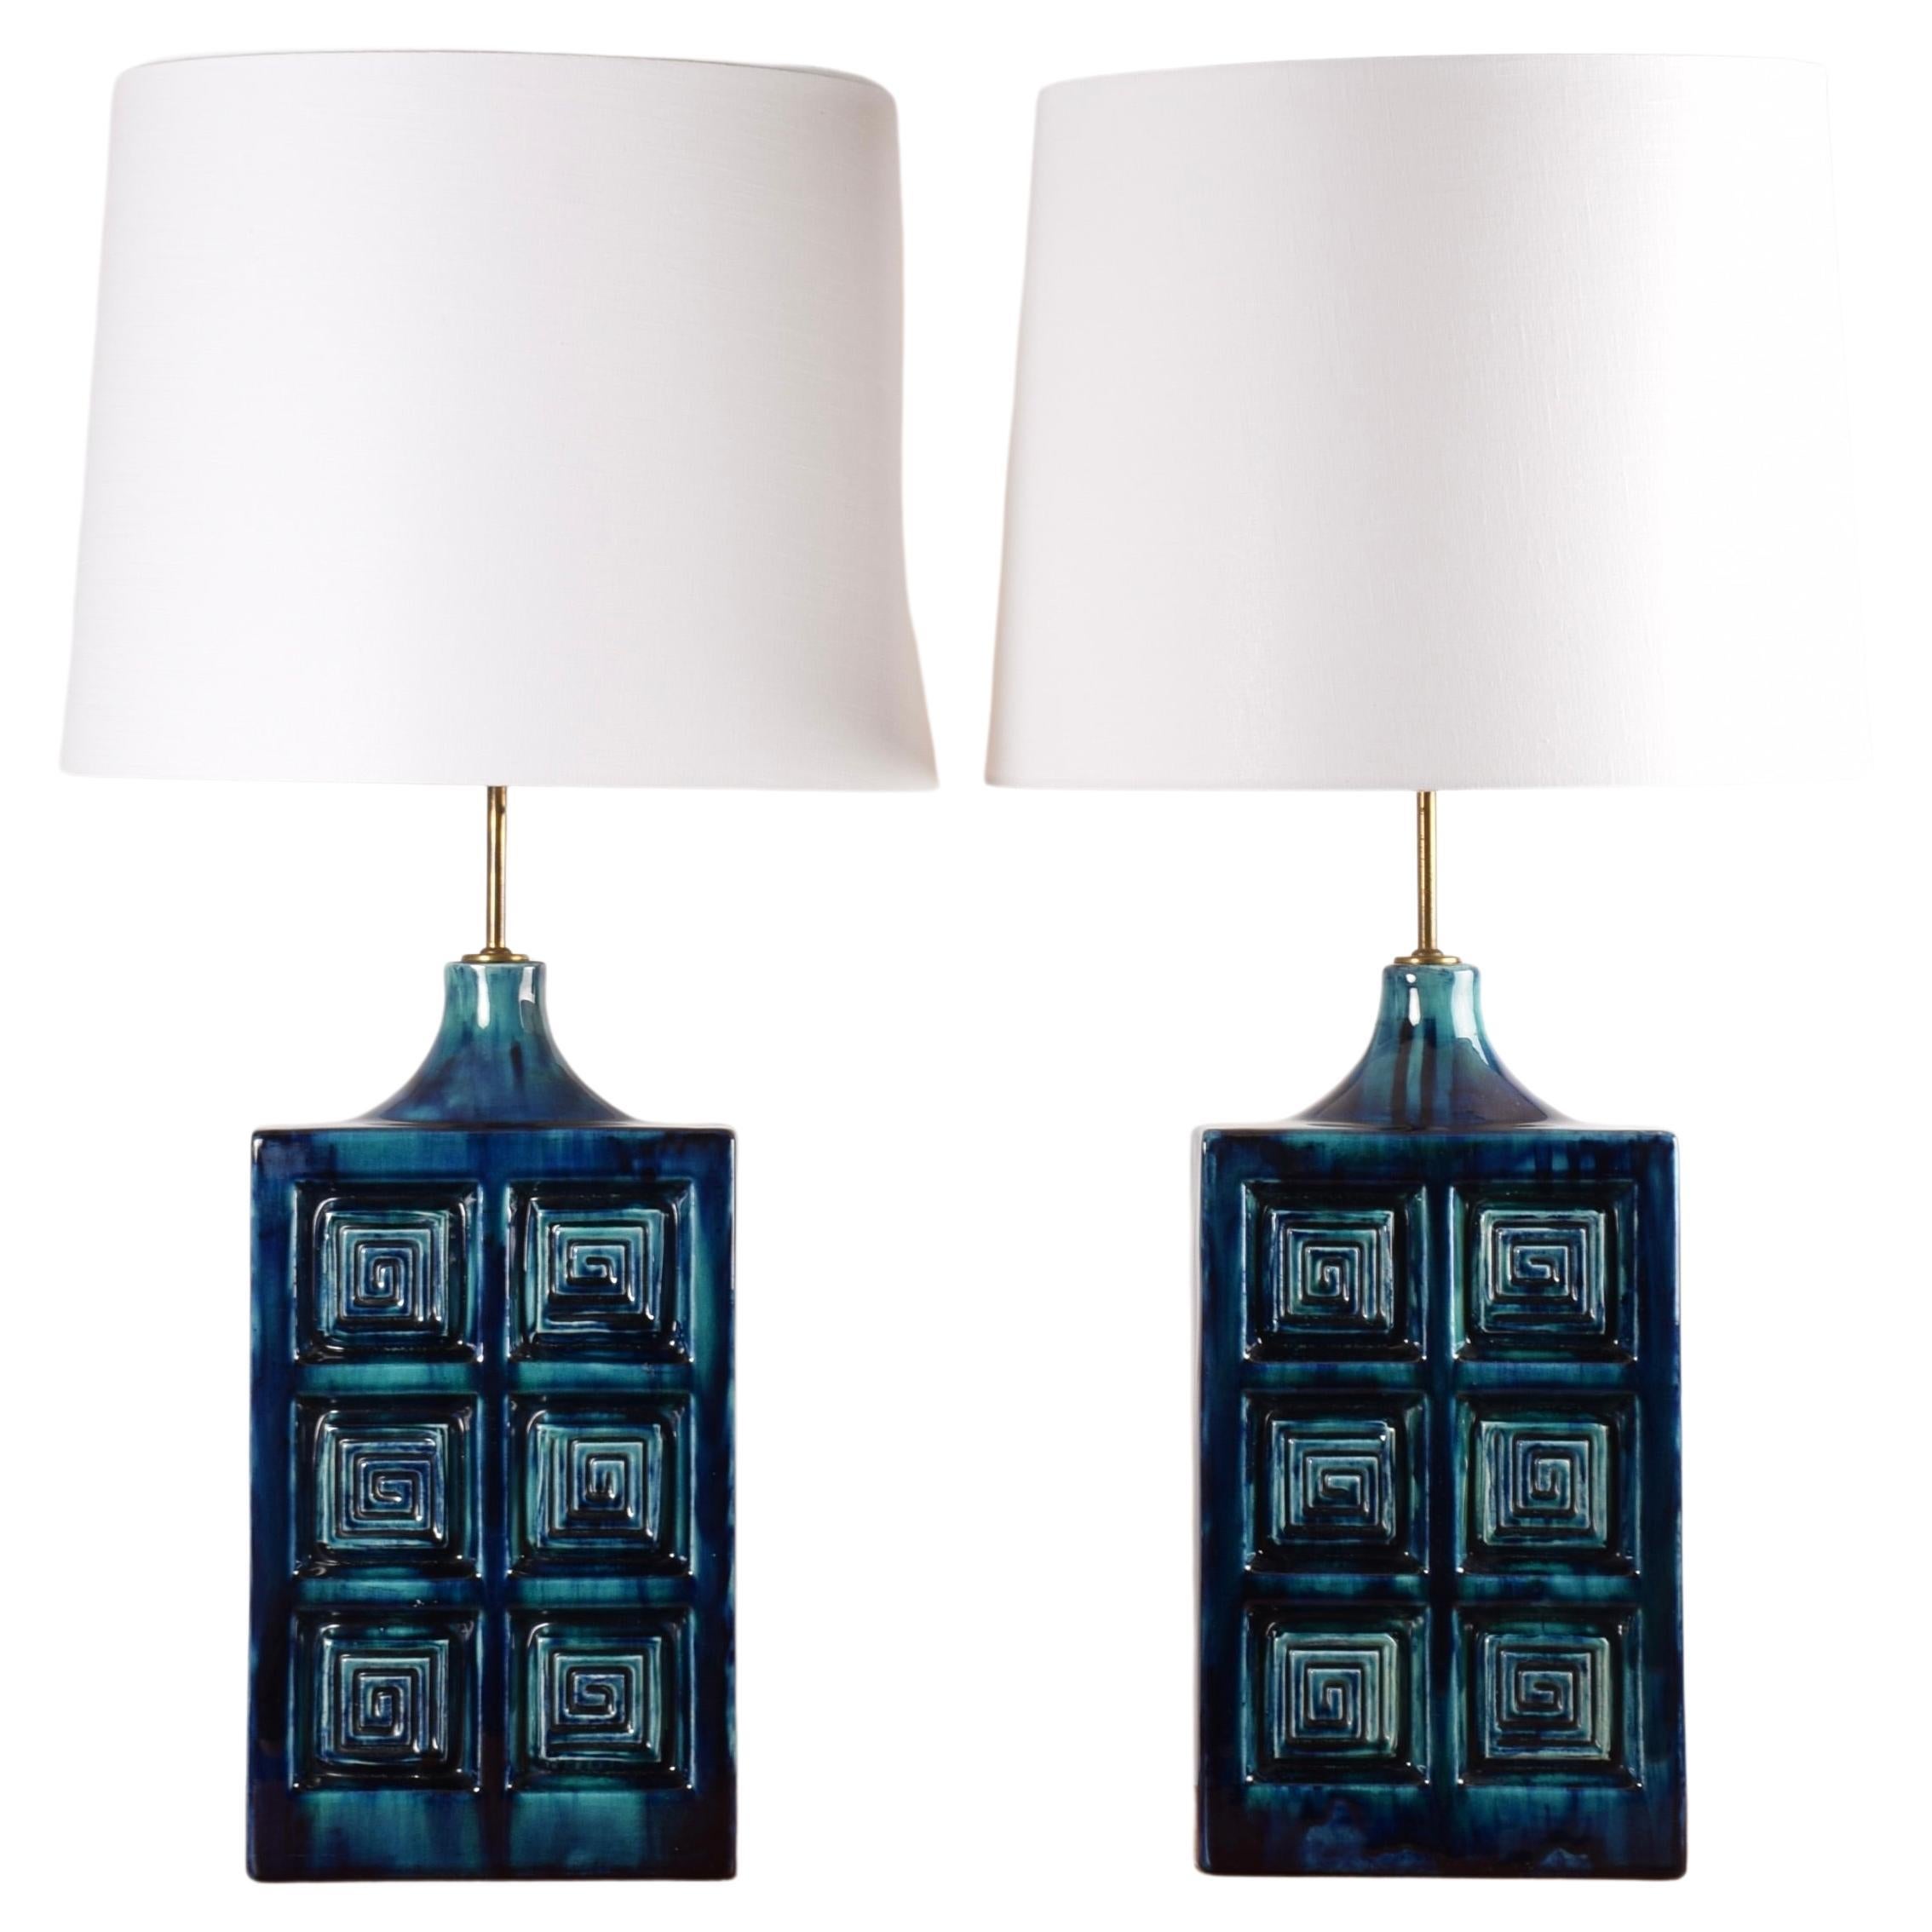 Pair of Huge Danish Modern Blue Ceramic & Brass Table Lamps by S Holstein, 1960s